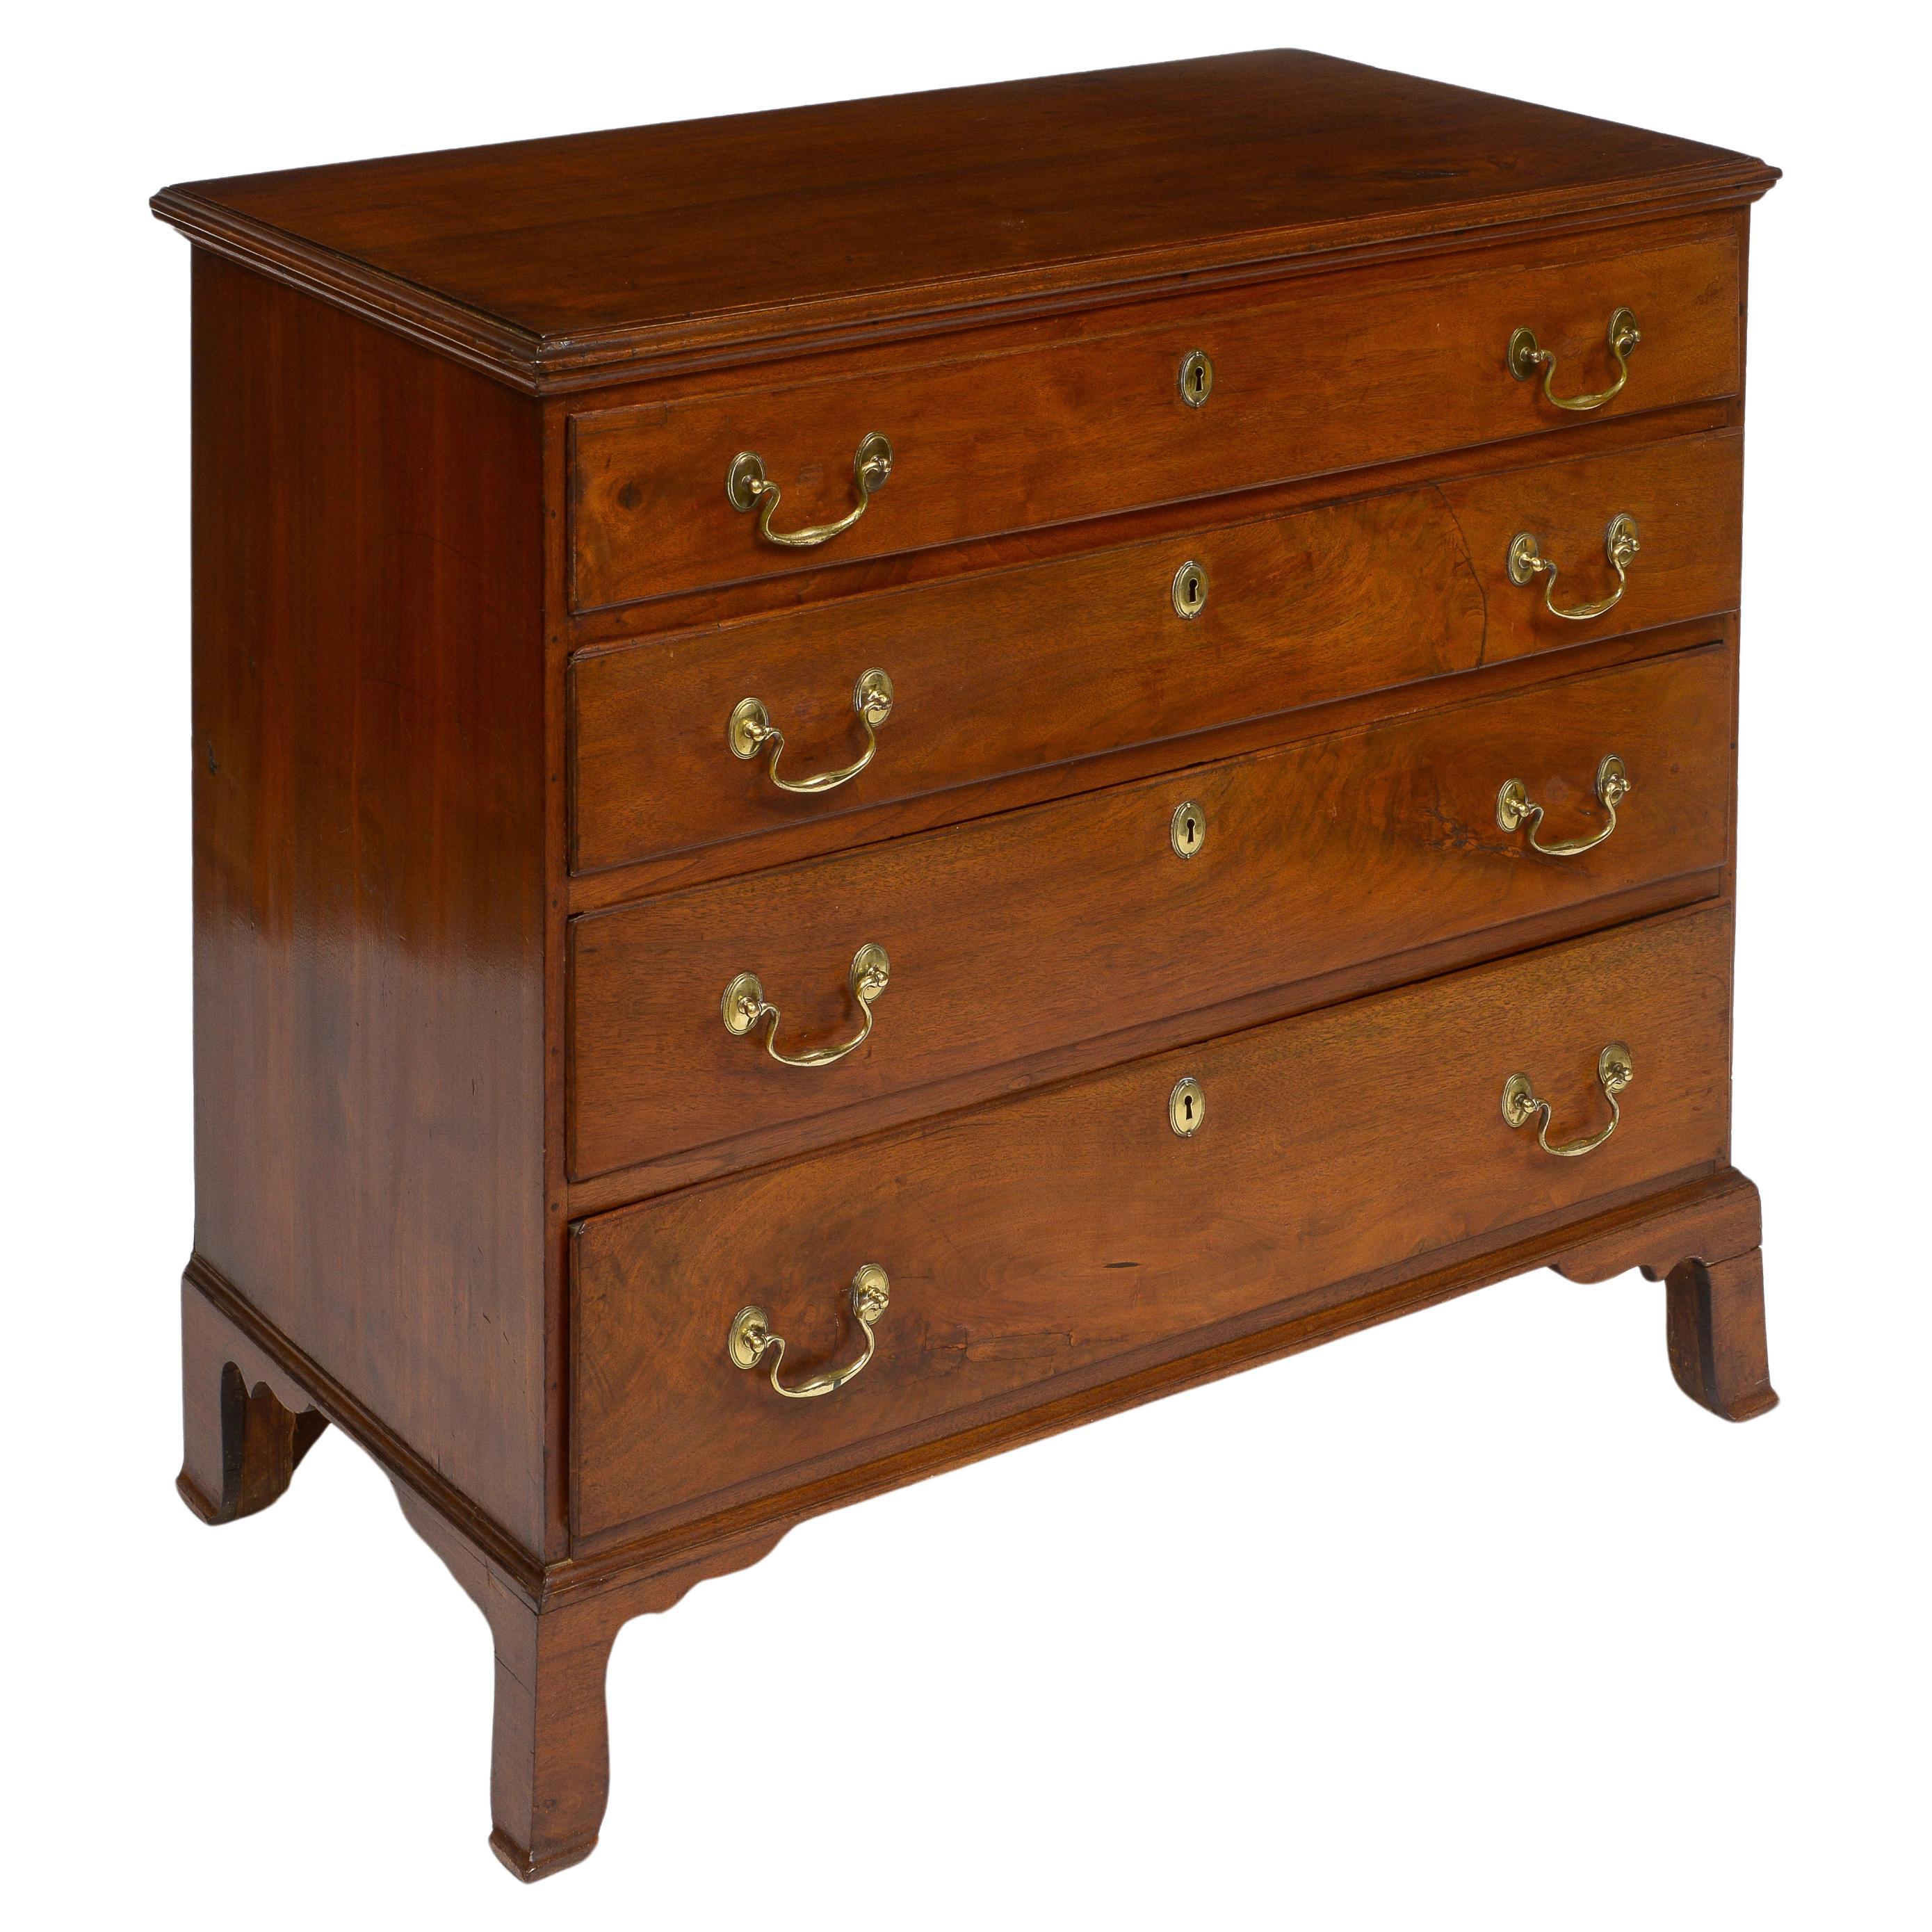 Late 18th Century American Walnut Chest of Drawers For Sale